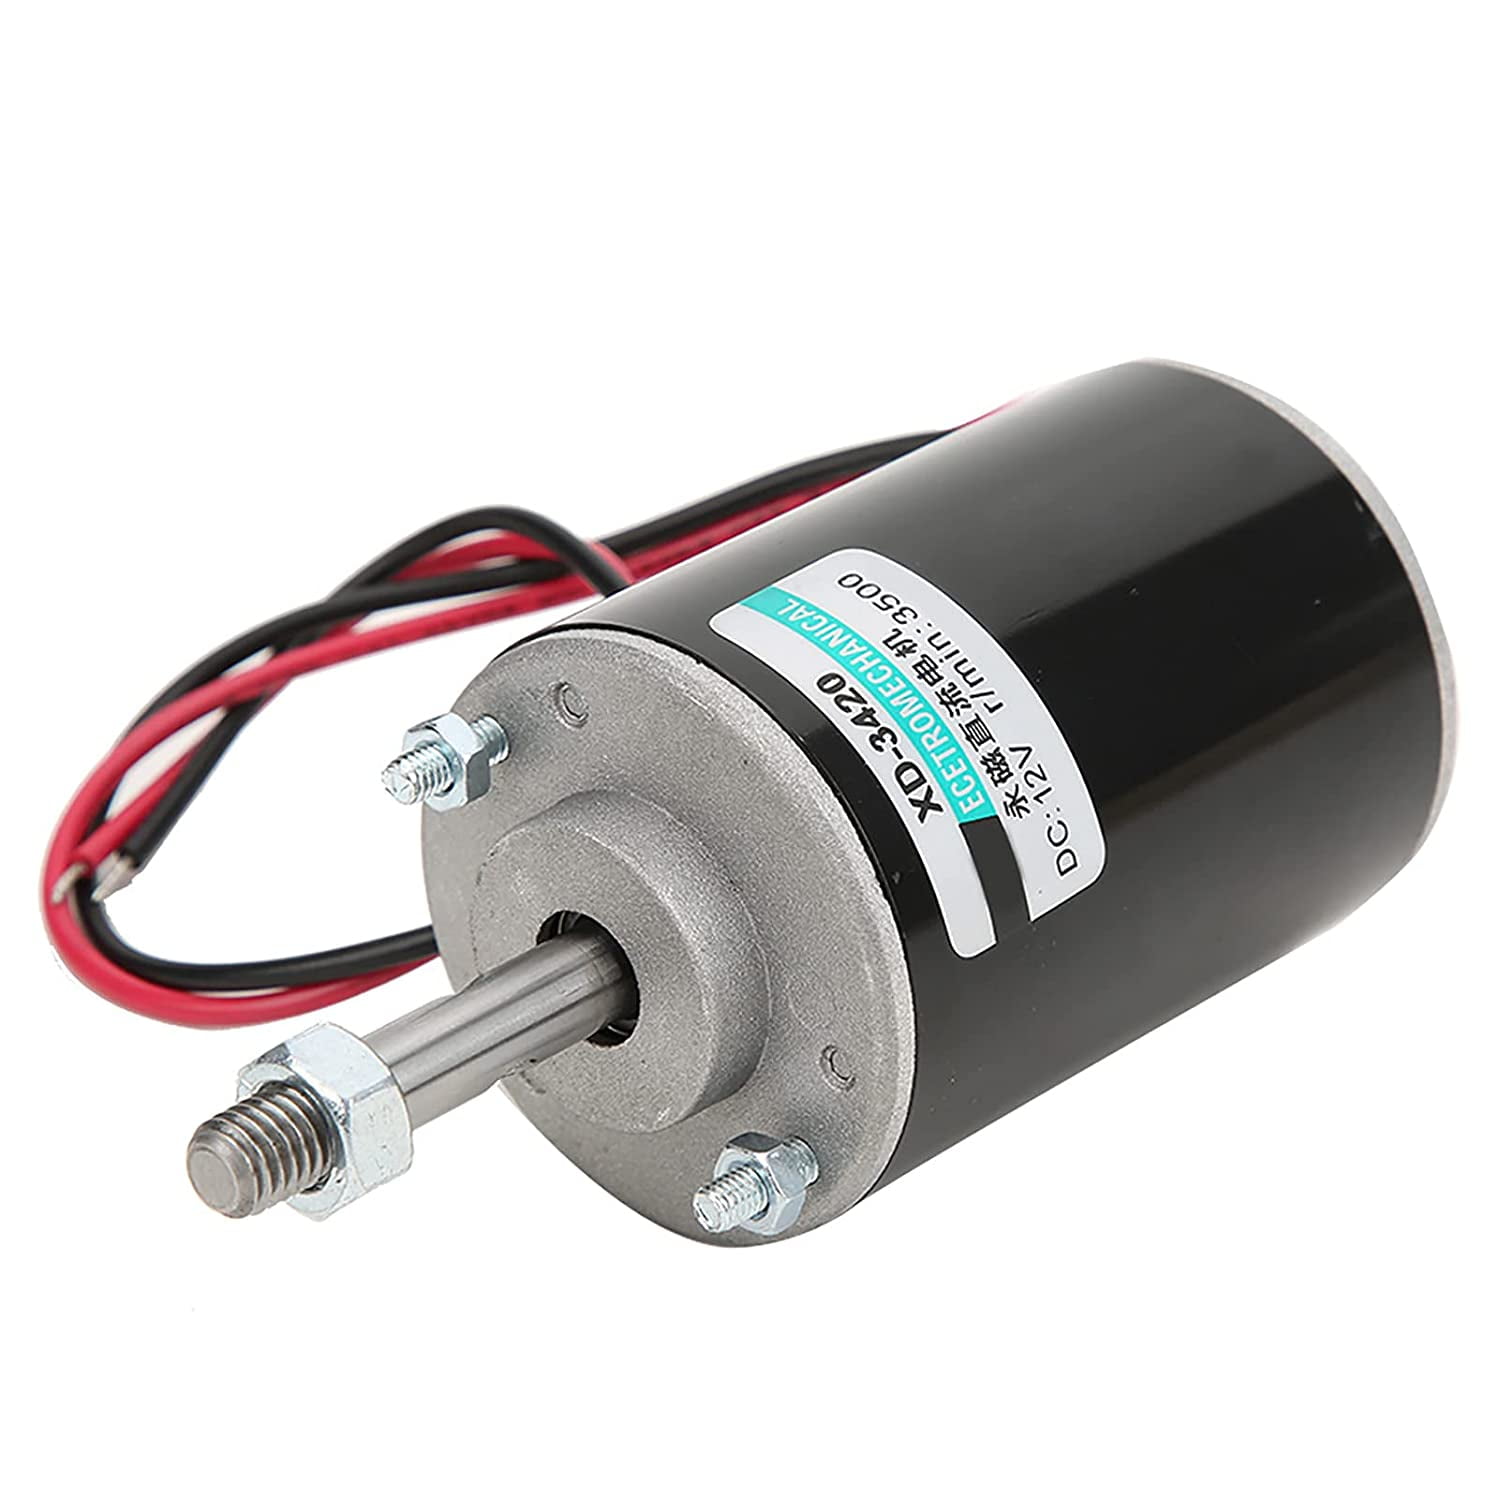 Details about   24V 30W Permanent Magnet Electric DC Motor High Speed CW/CCW For DIY Generator 